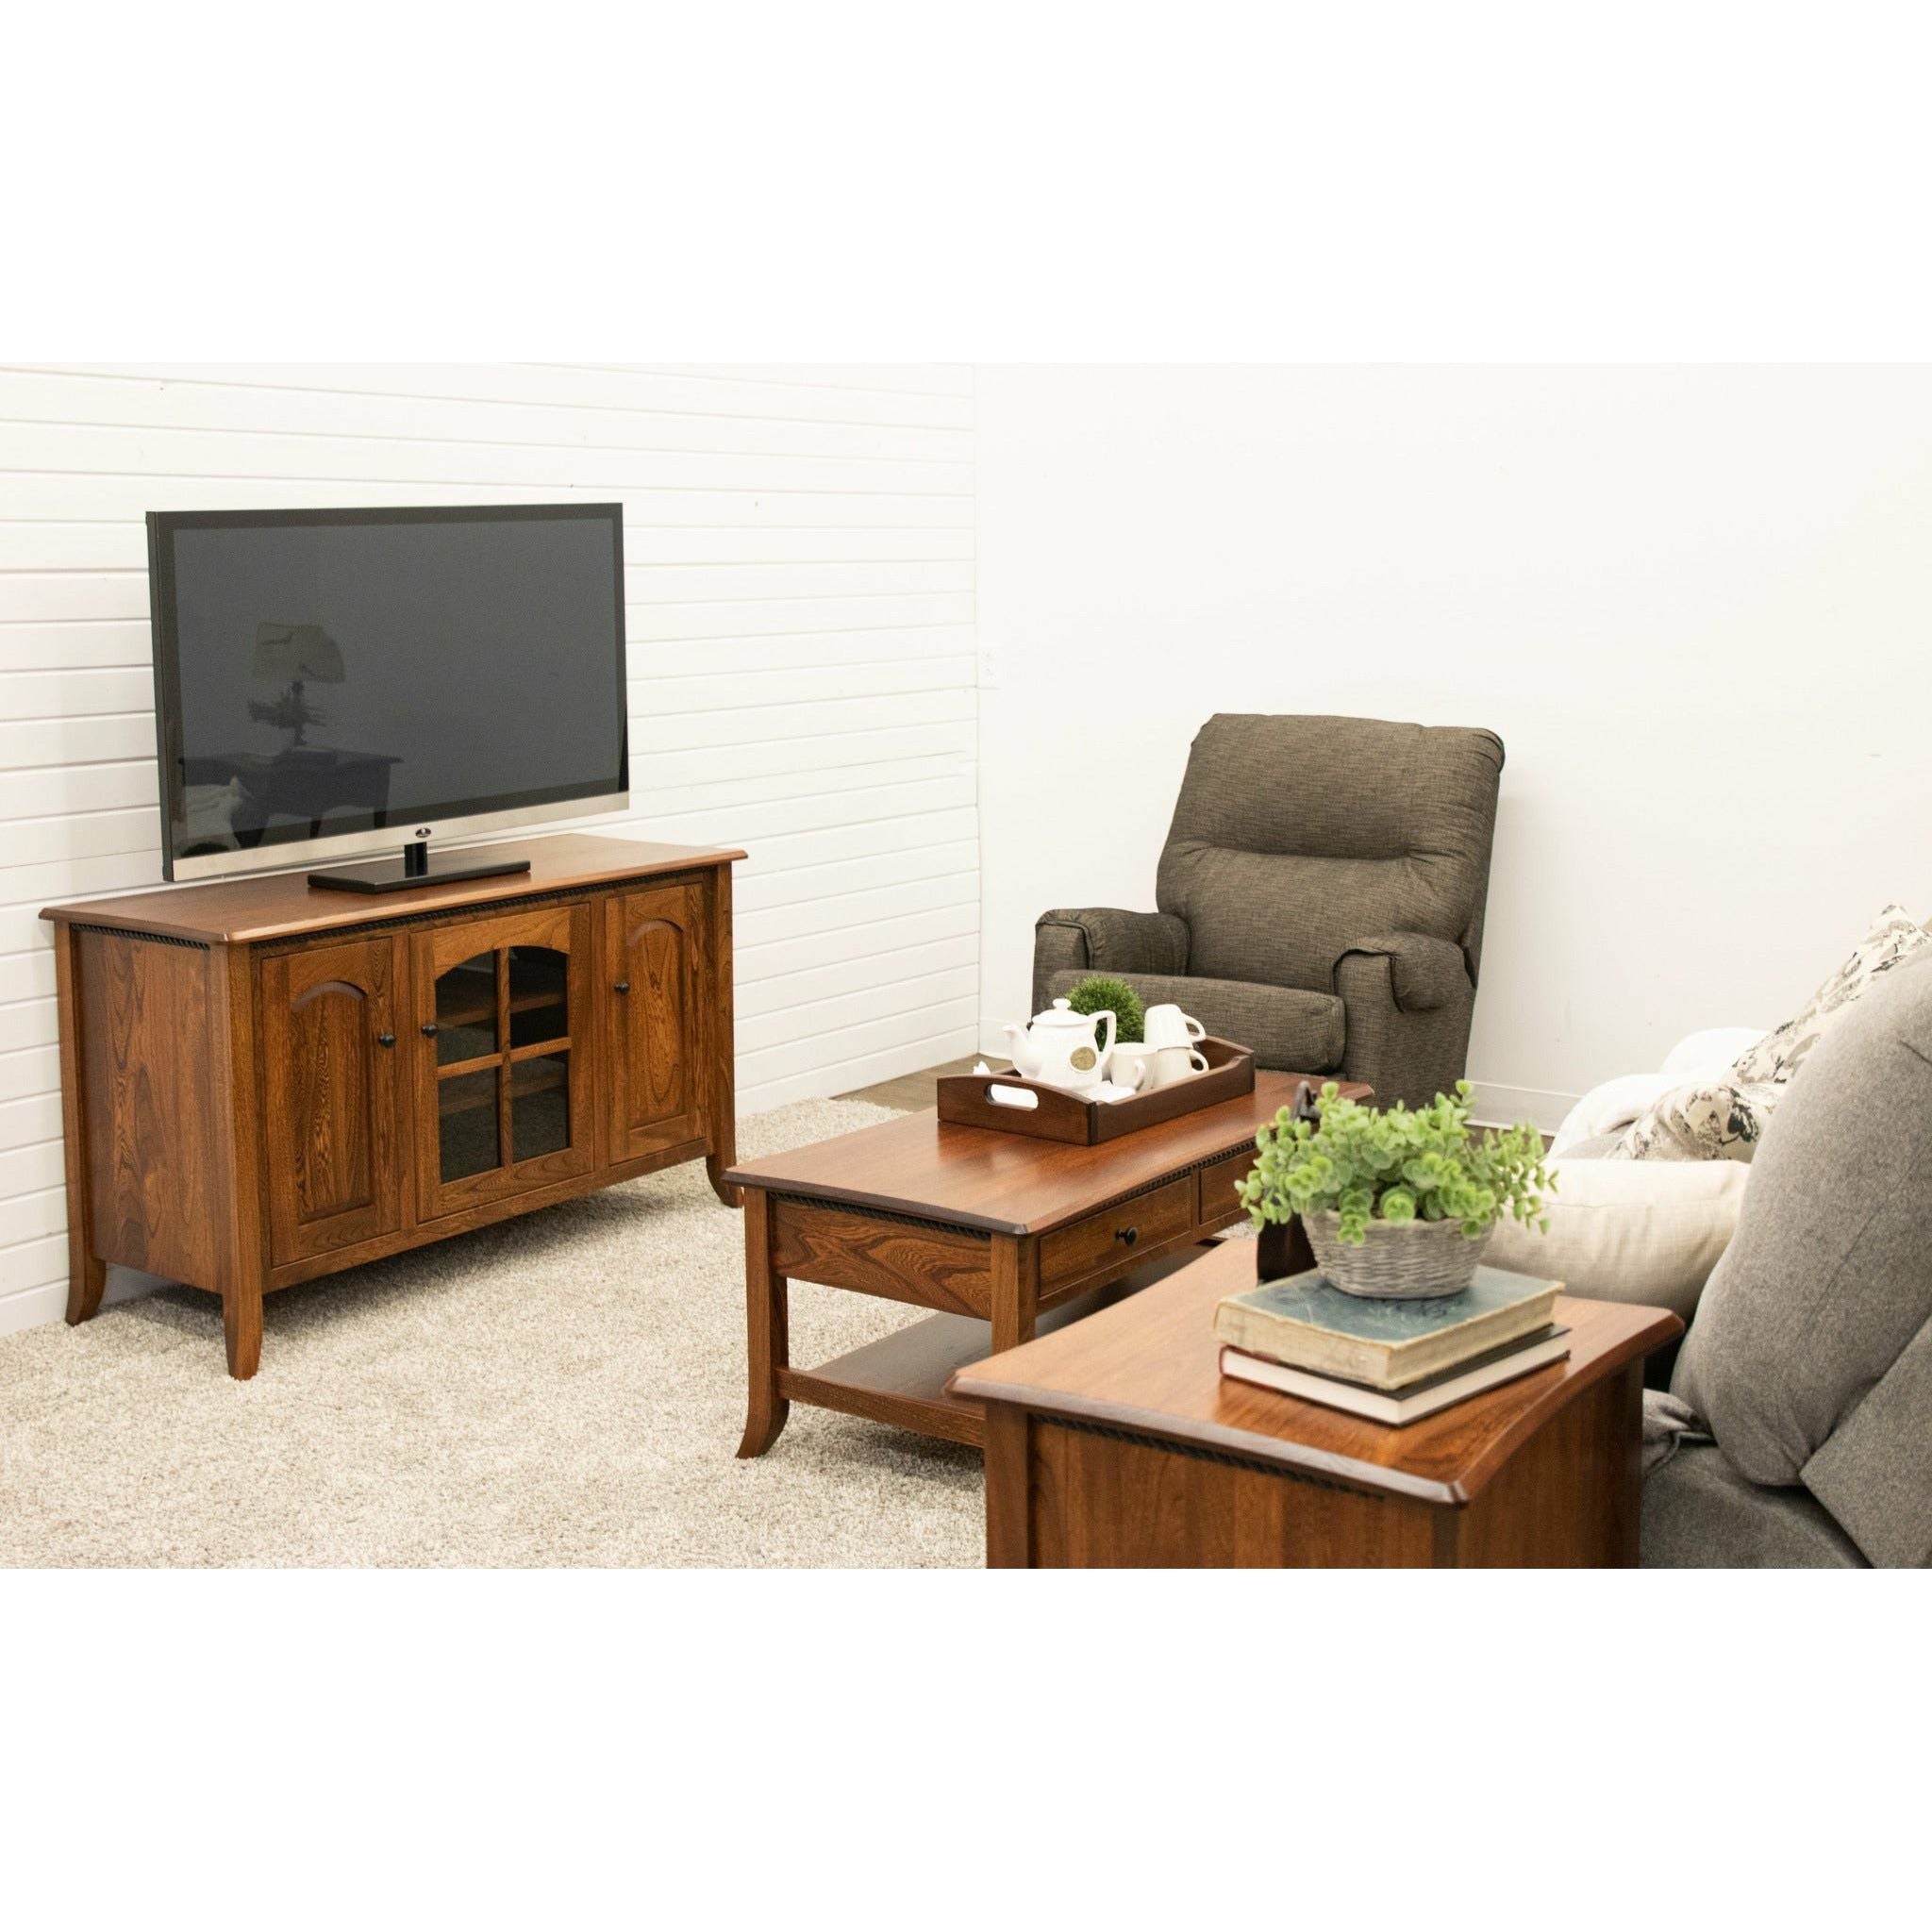 Plymouth Open Square Chairside End Table